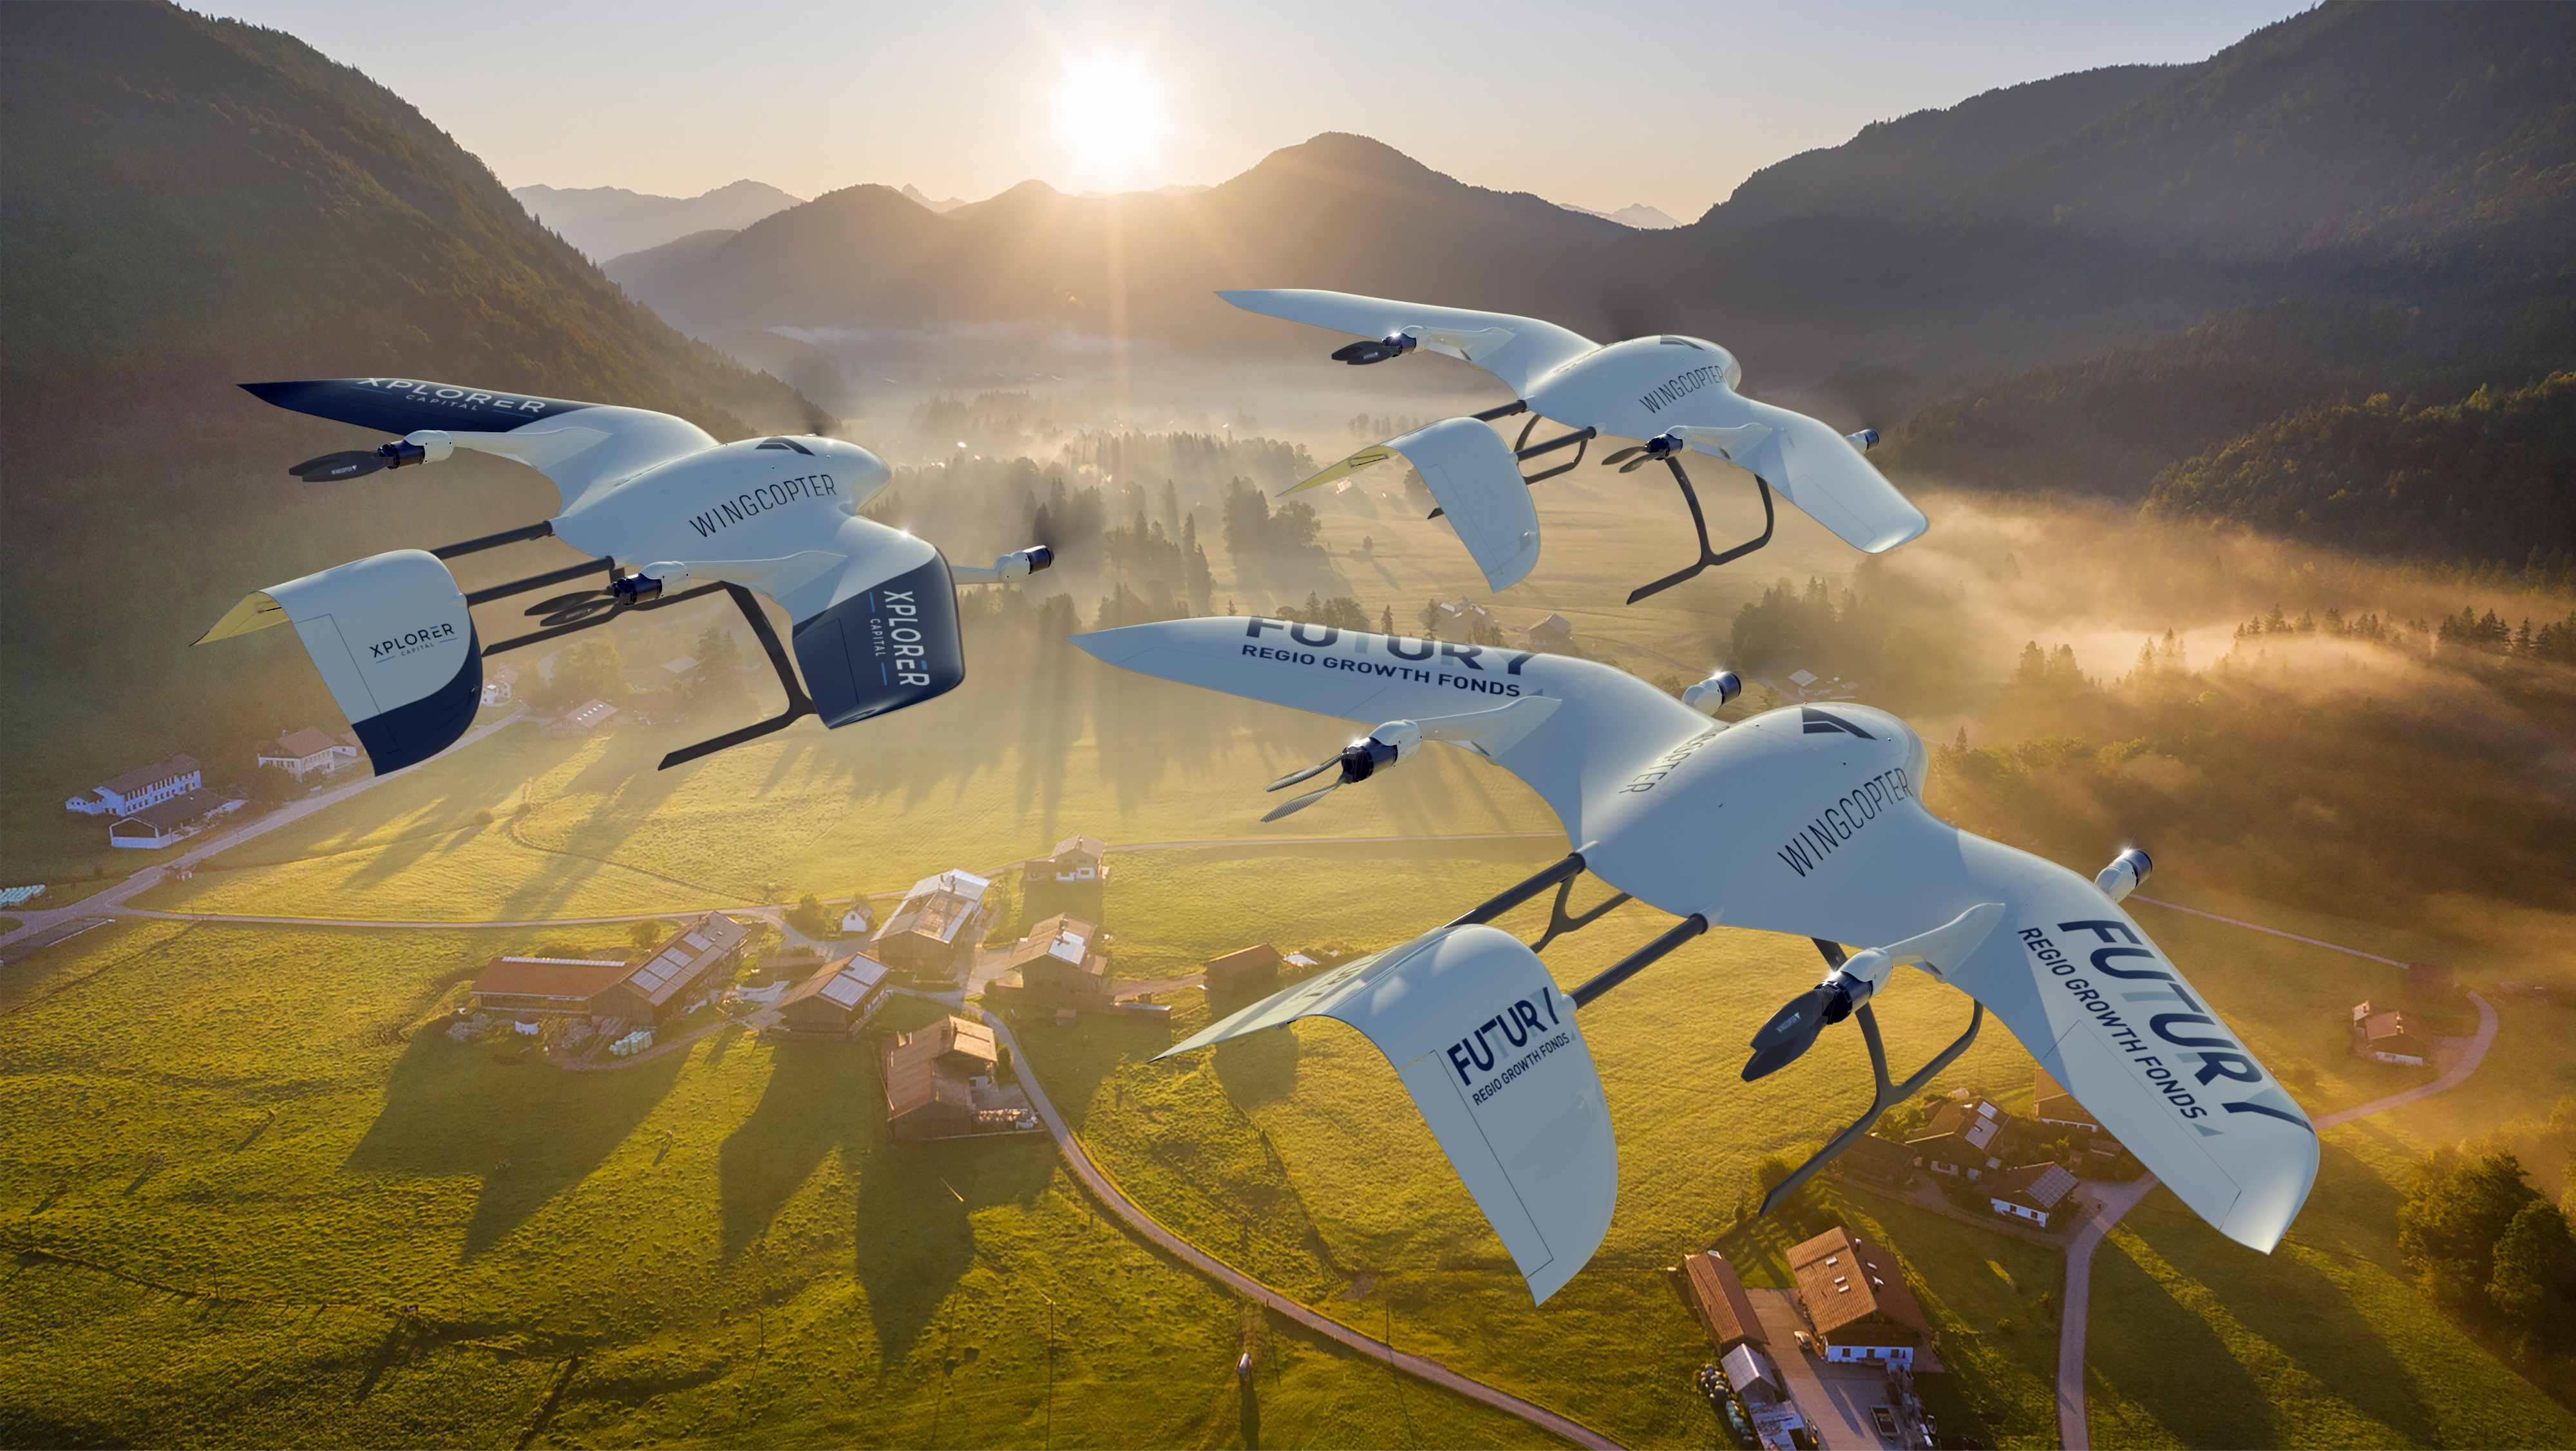 Wingcopter raises $22M to advance technology leadership in drone delivery, announces serial production